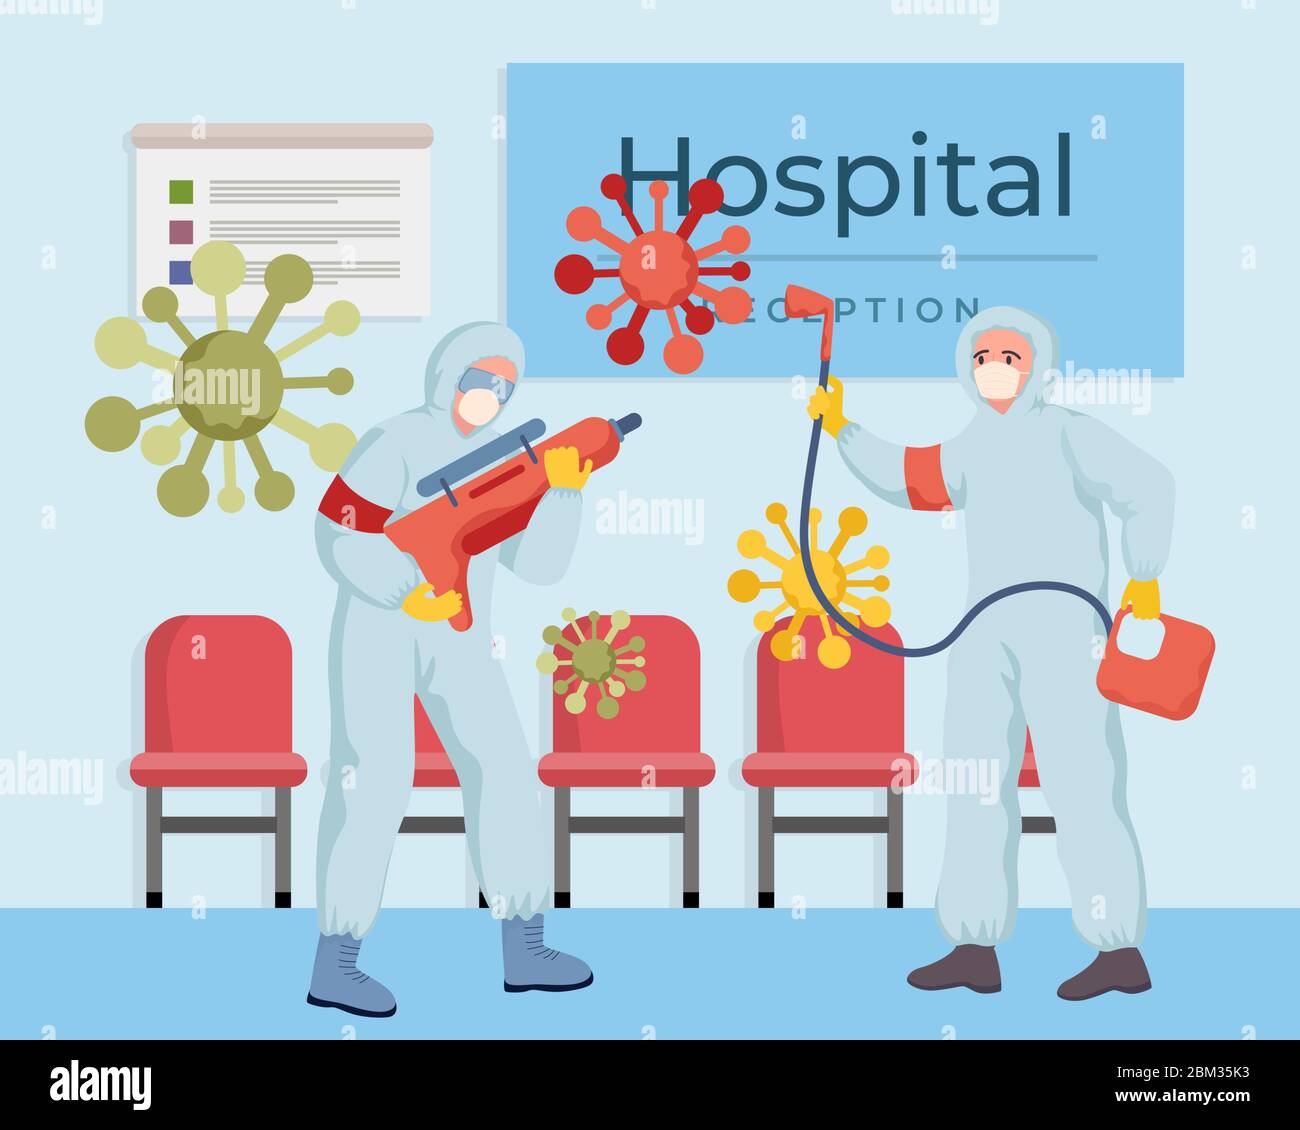 Medical workers in protective masks and suits disinfecting hospital during global pandemic of Coronavirus Covid-19 vector flat illustration. China respiratory influenza 2019-ncov outbreak concept. Stock Vector